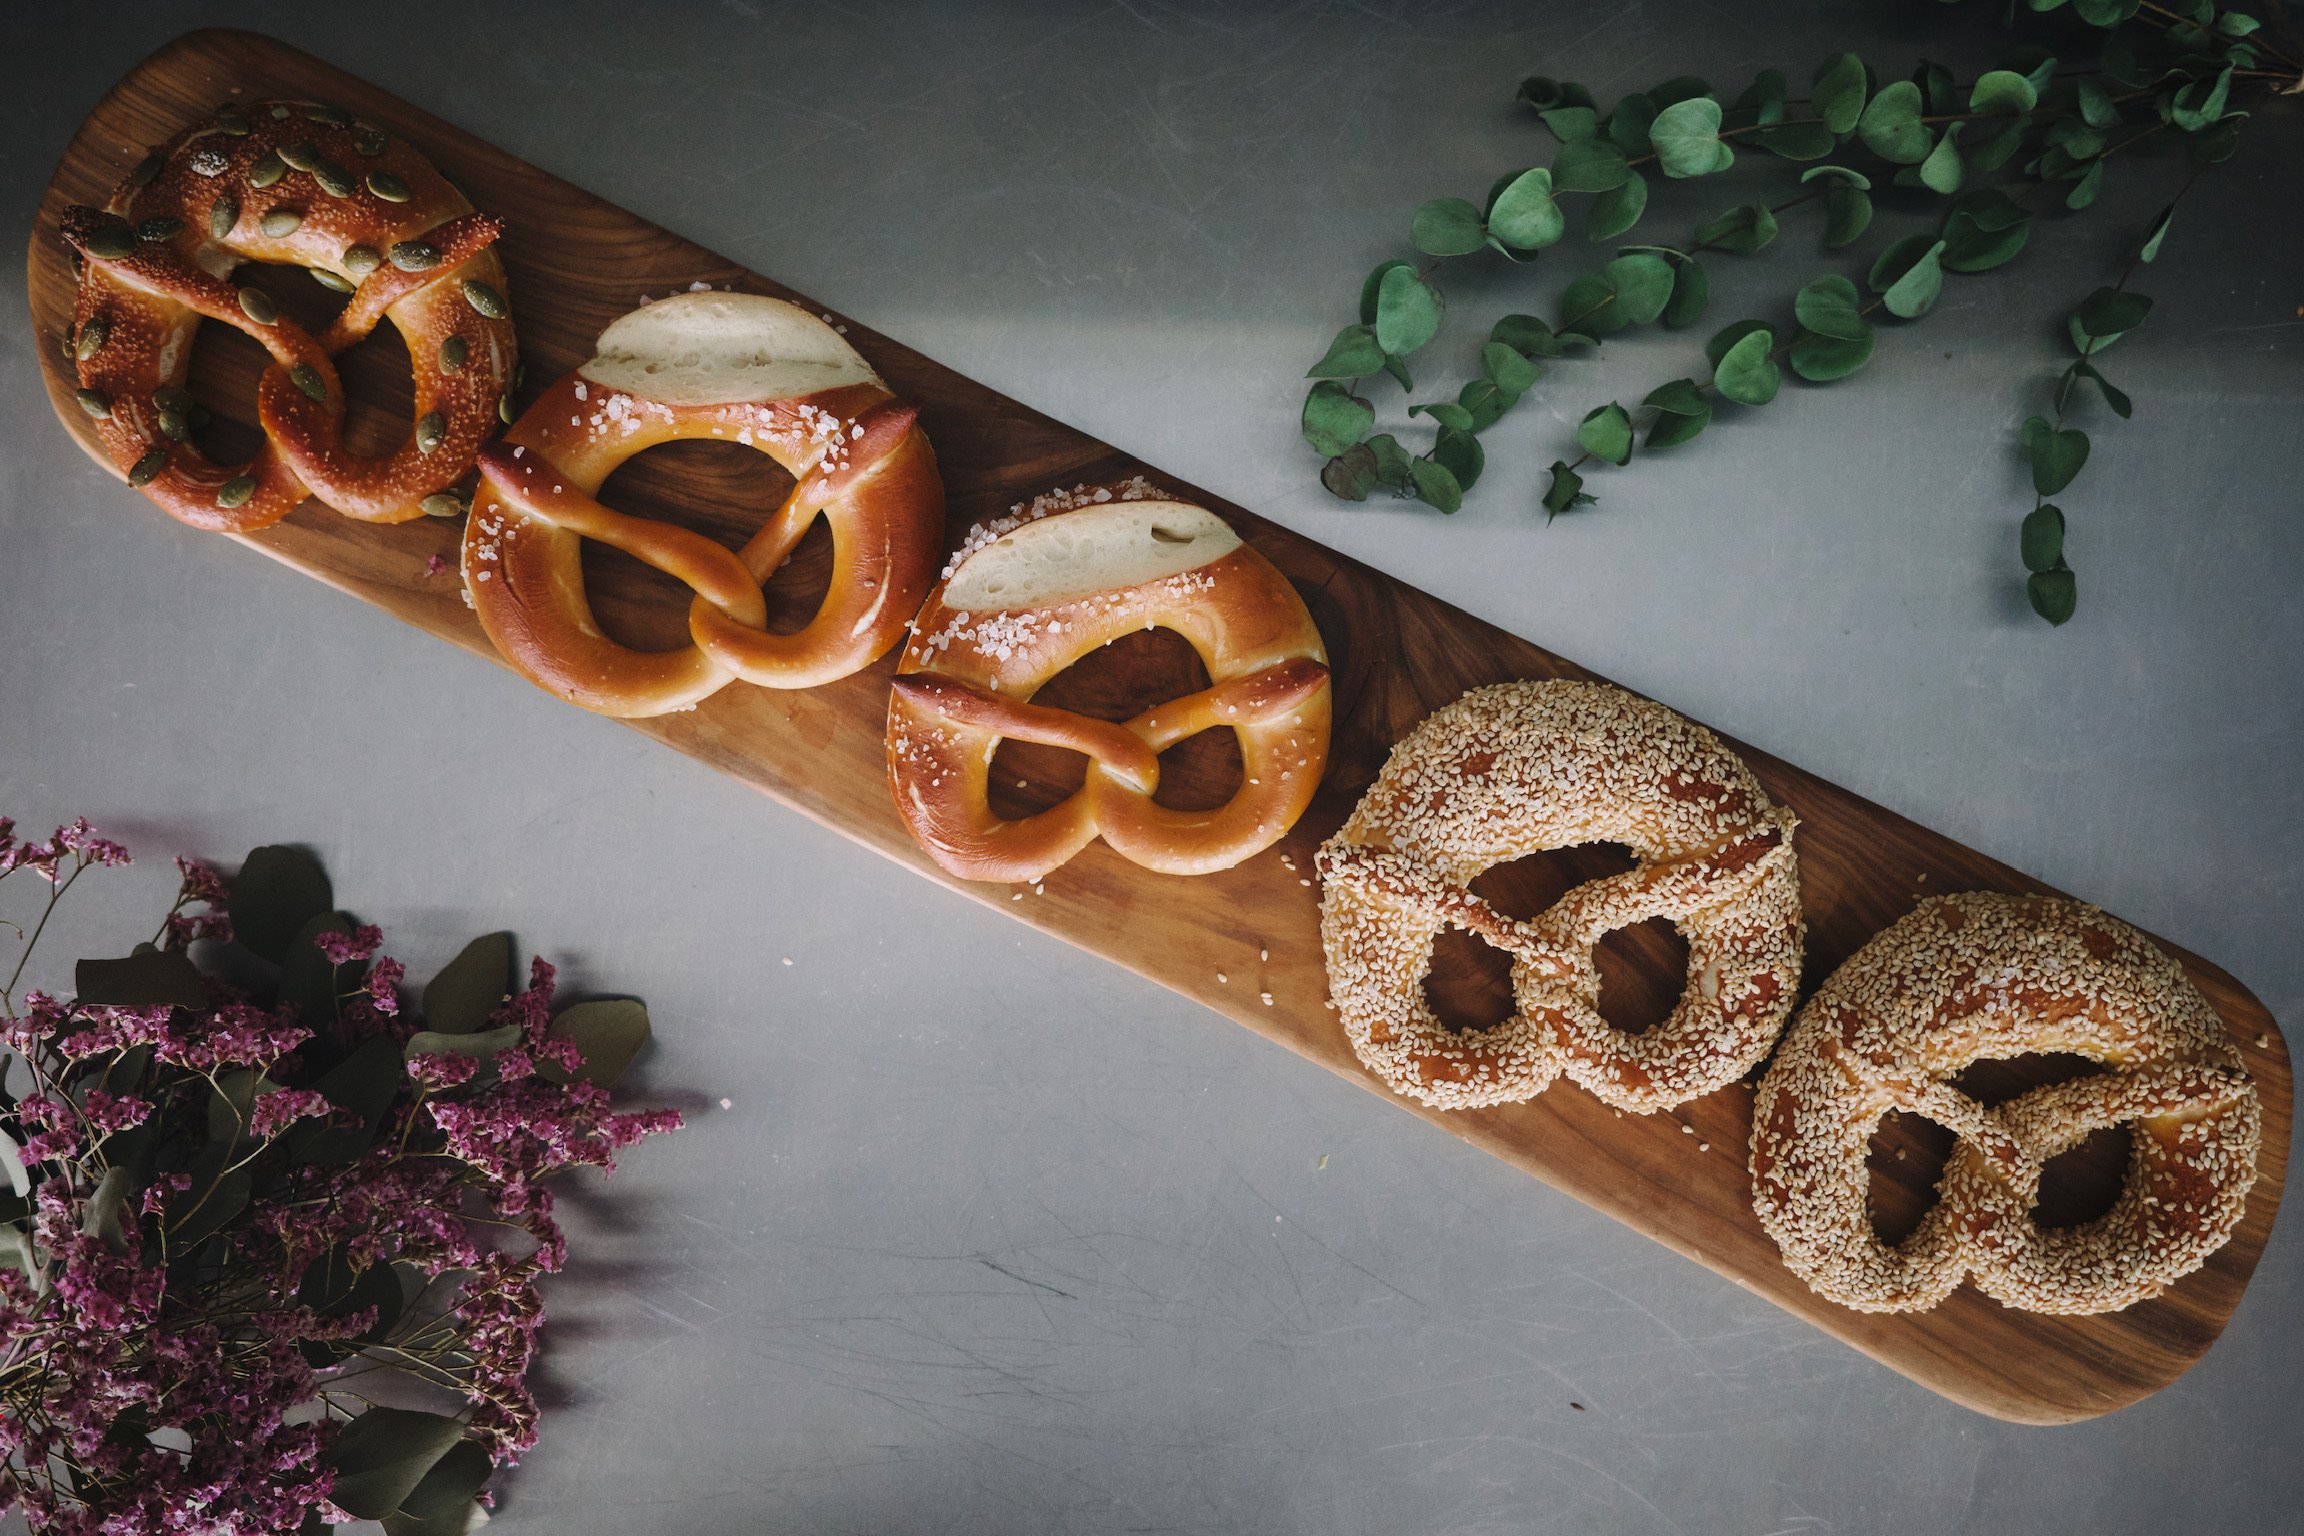 5 pretzels on a wooden plank on top of a stainless steel counter with dried flower bouquets as decorations.